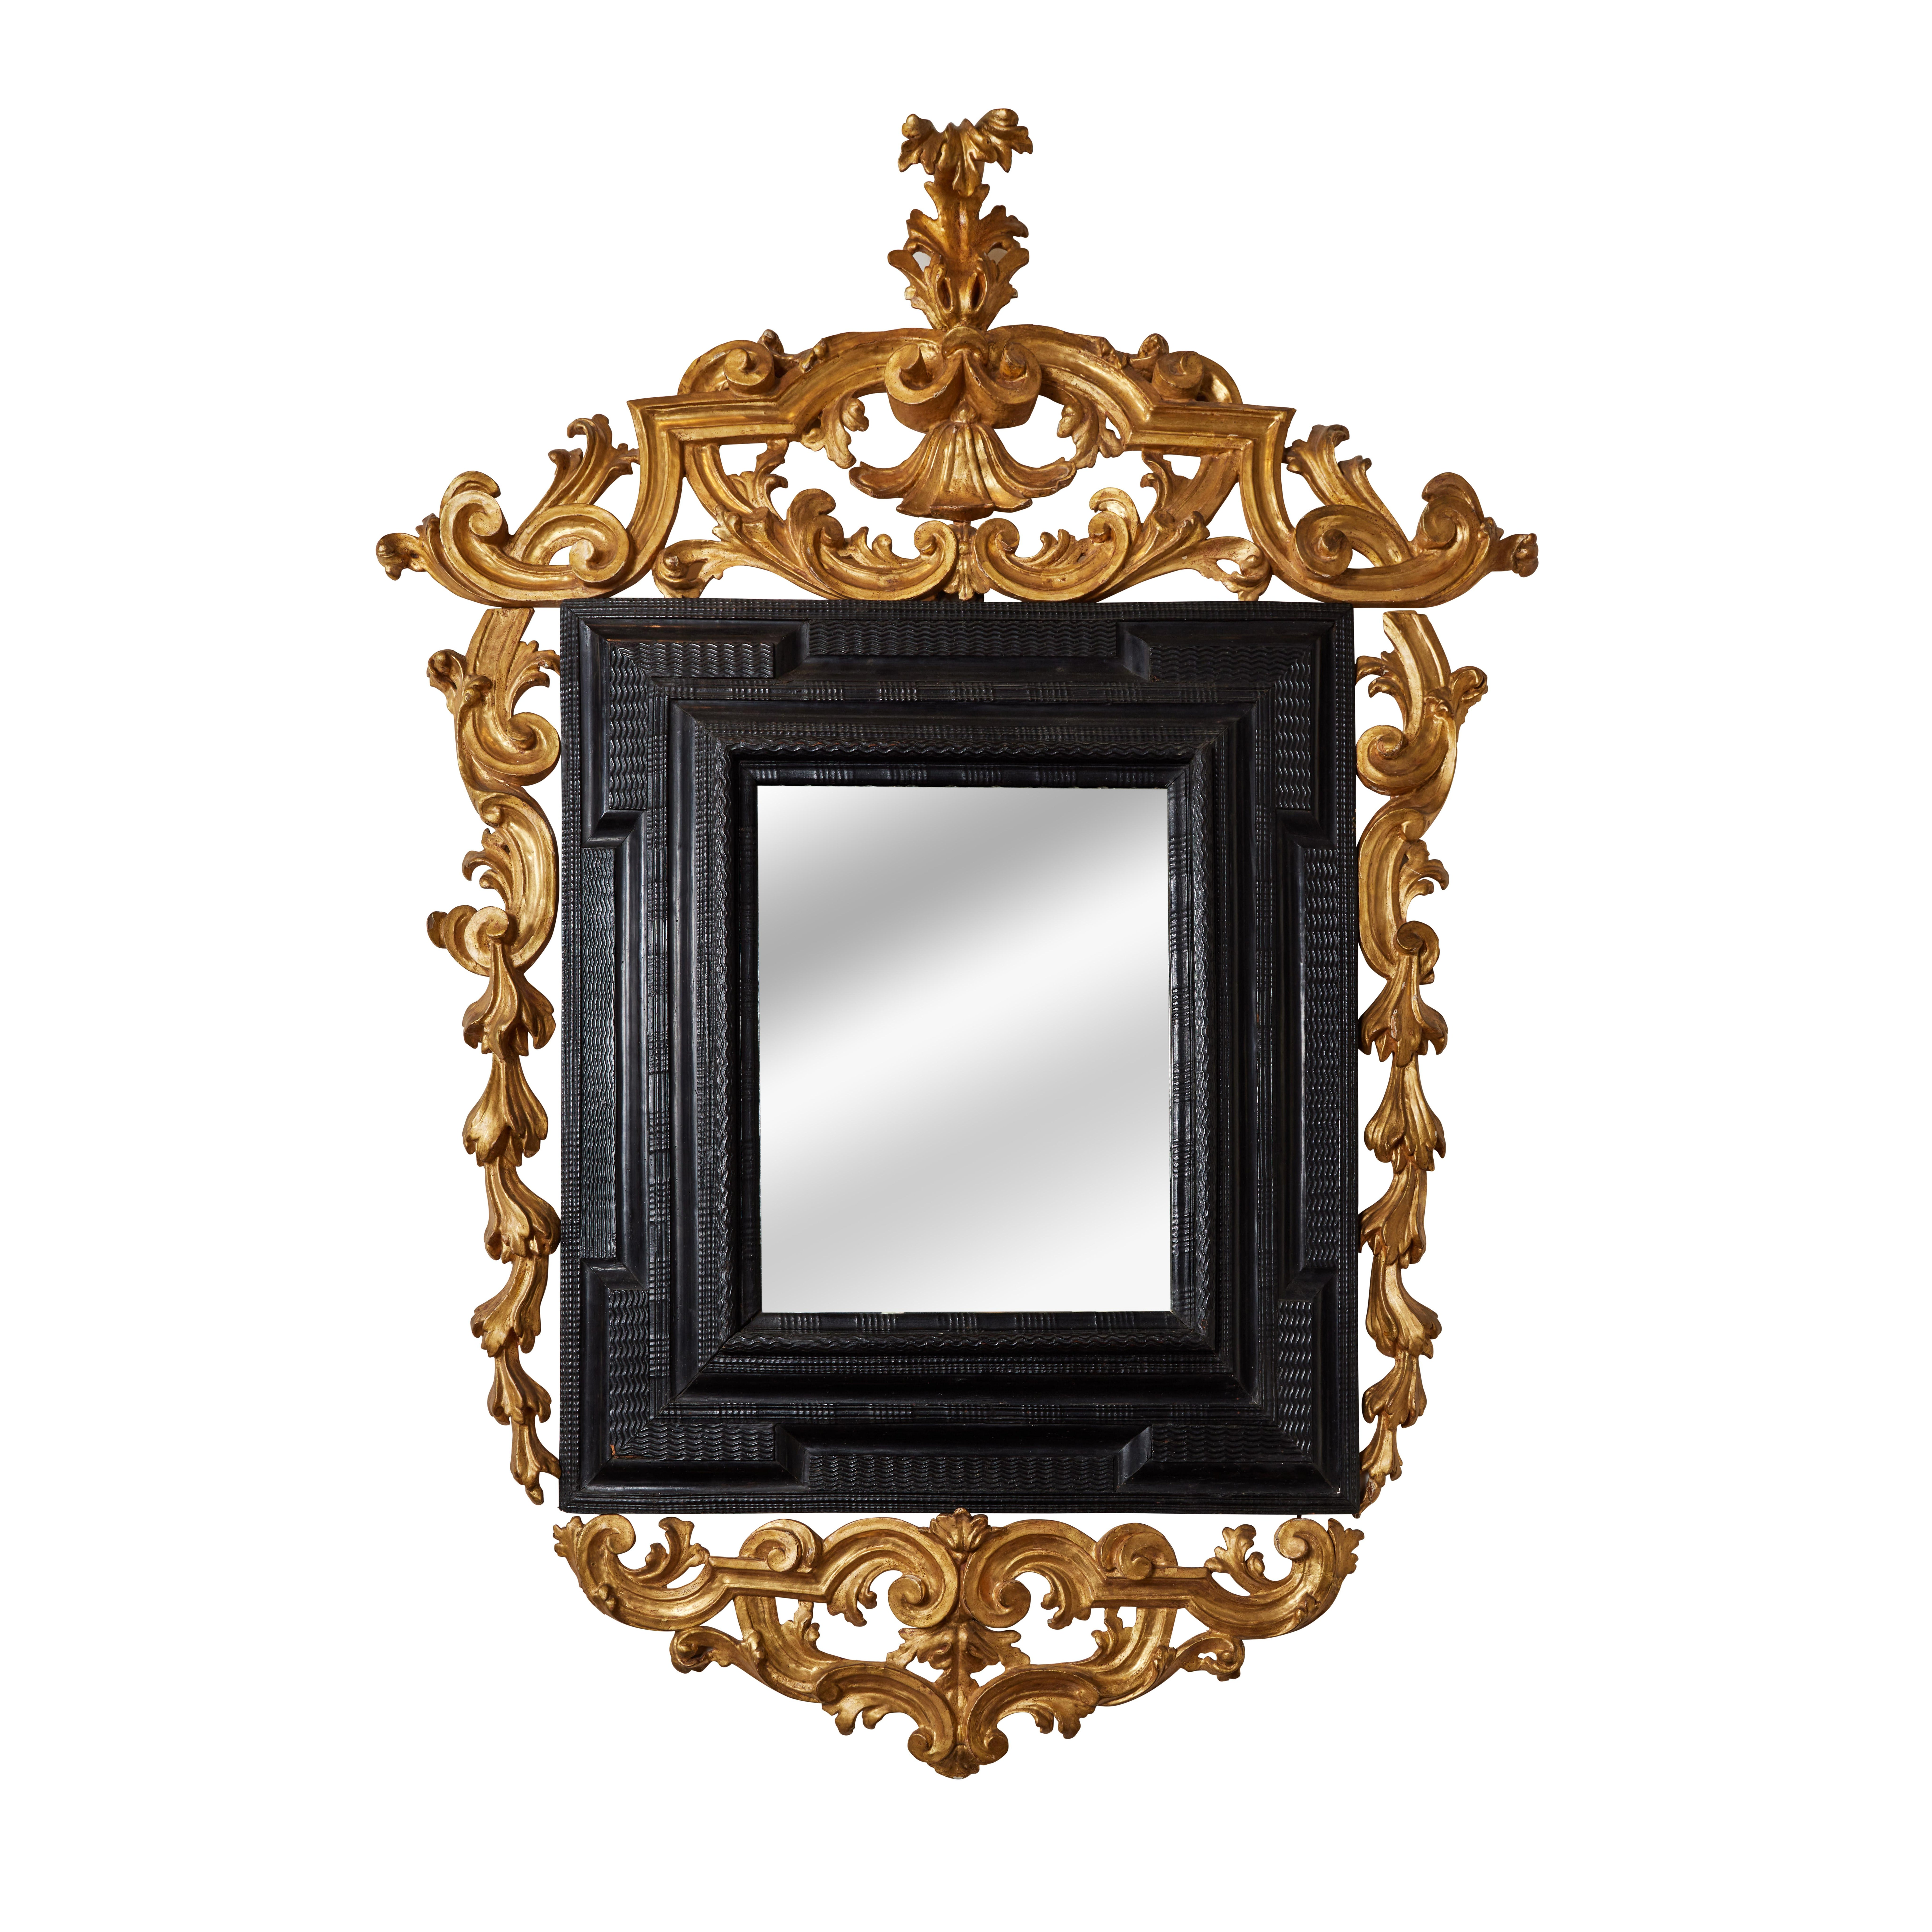 Early 1800’s, Genoa Mirror For Sale